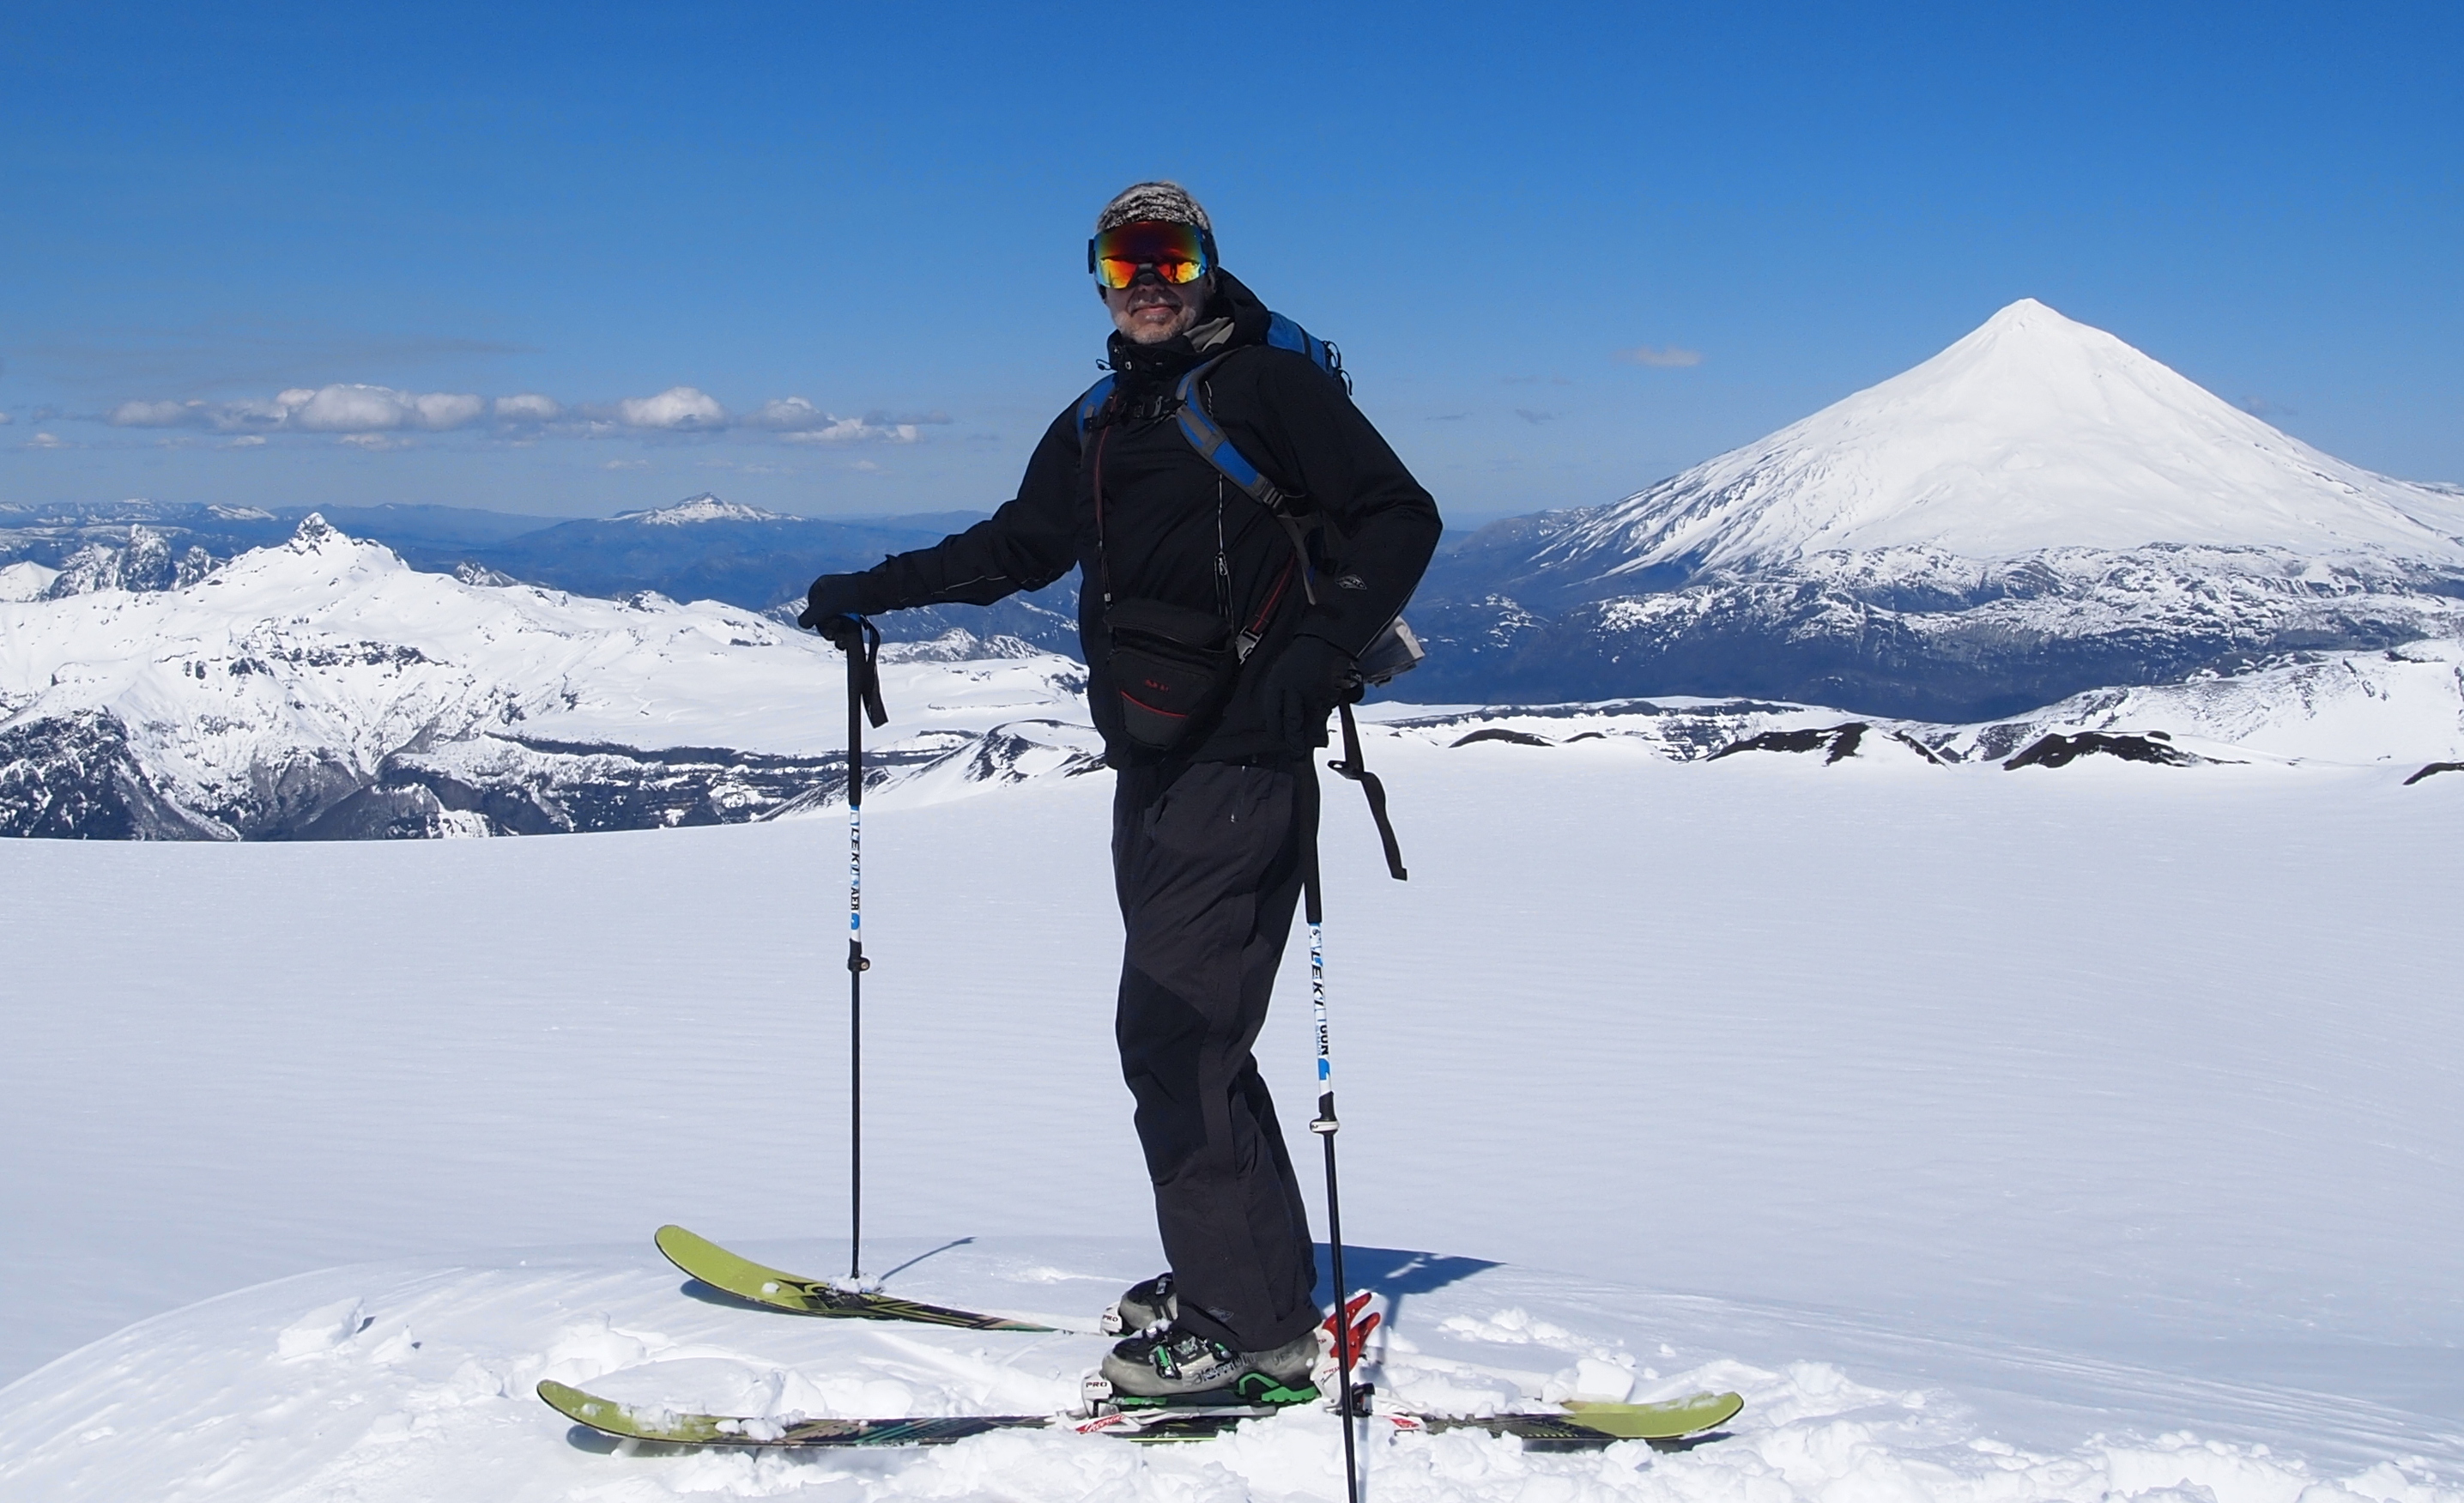 Yours truly admires the view, with the crater, Volcan Lanin (3,750m) and the fang of Quinquilil Volcano in the back.